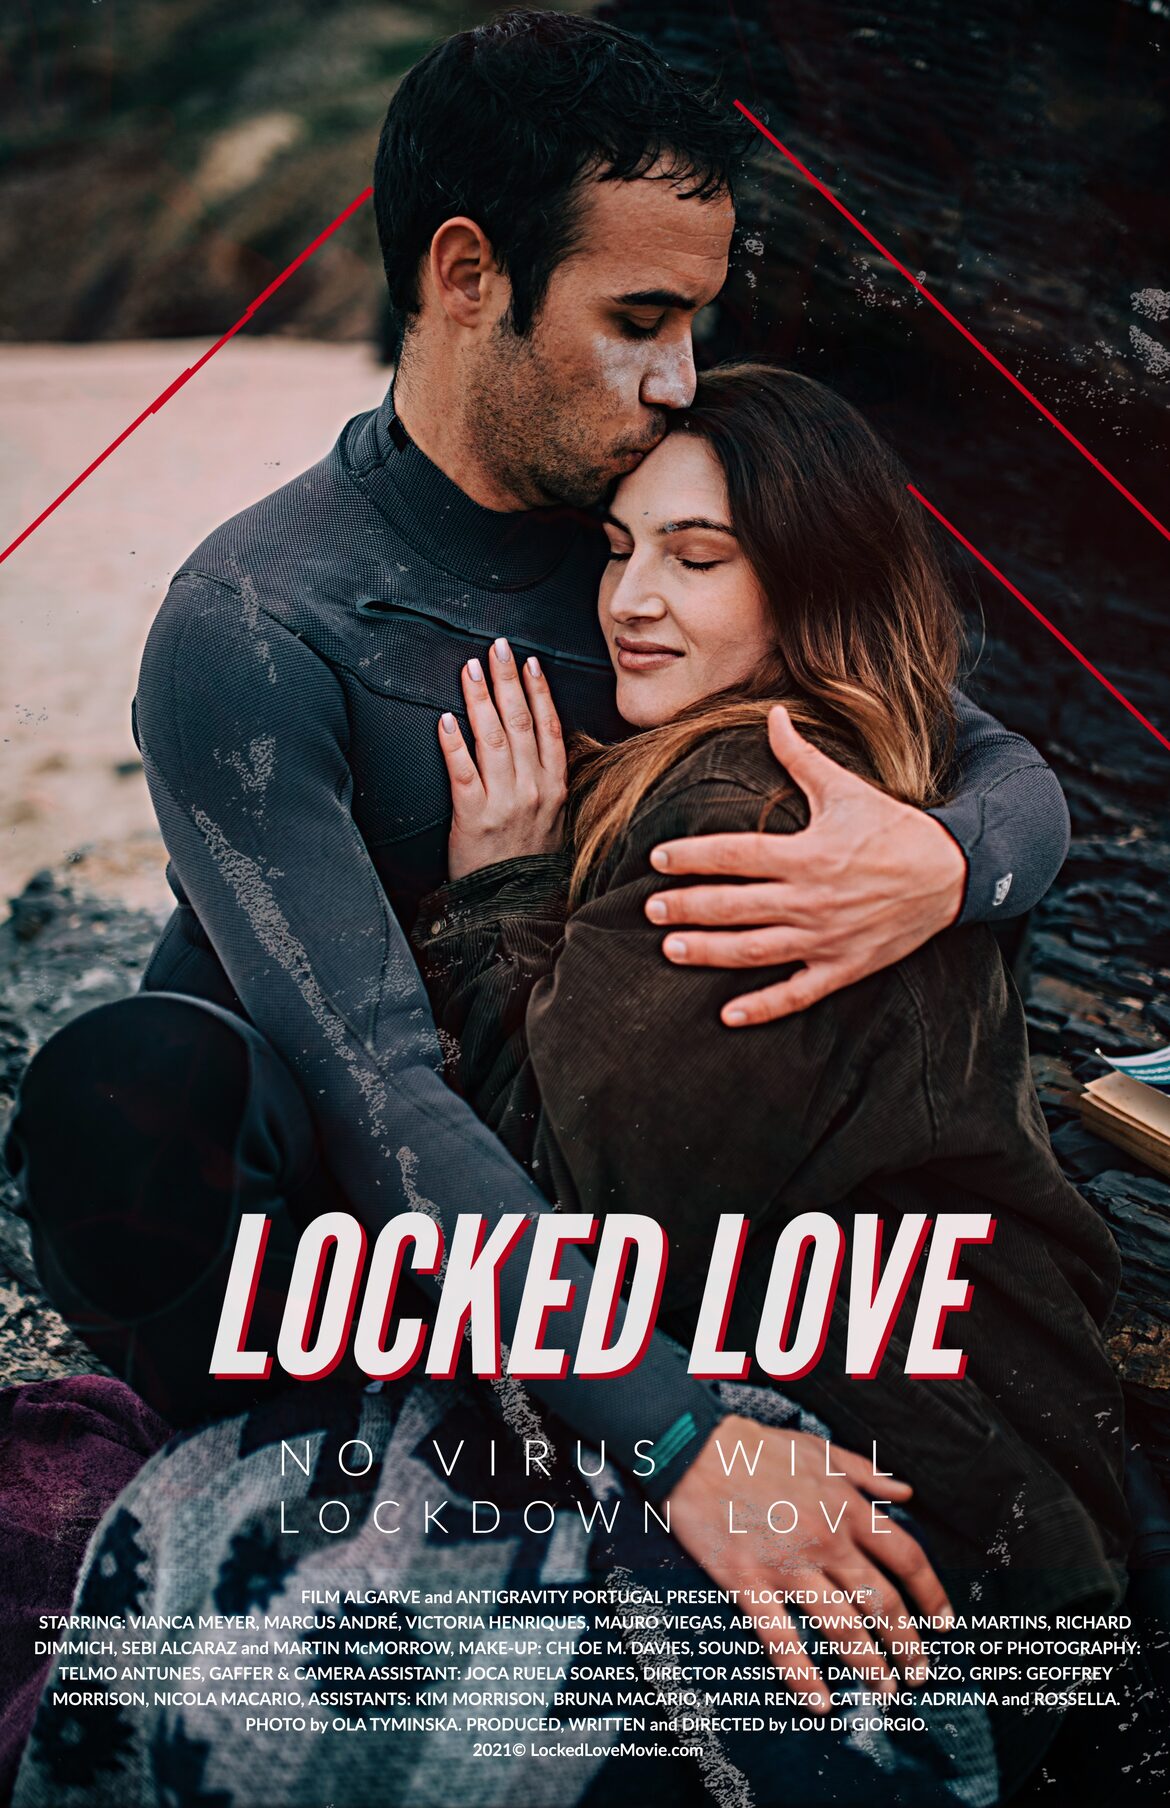 Locked Love | Official Movie Poster | Locked Love, a Lou Di Giorgio Film with Vianca Meyer, Marcus André, Victoria Henriques, Mauro Viegas and Abigail Townson. Cinematographer Telmo Antunes, Assistant Joca Ruela Soares. A production of Film Algarve (Portugal) with Antigravity Portugal and Film Aim (Spain)